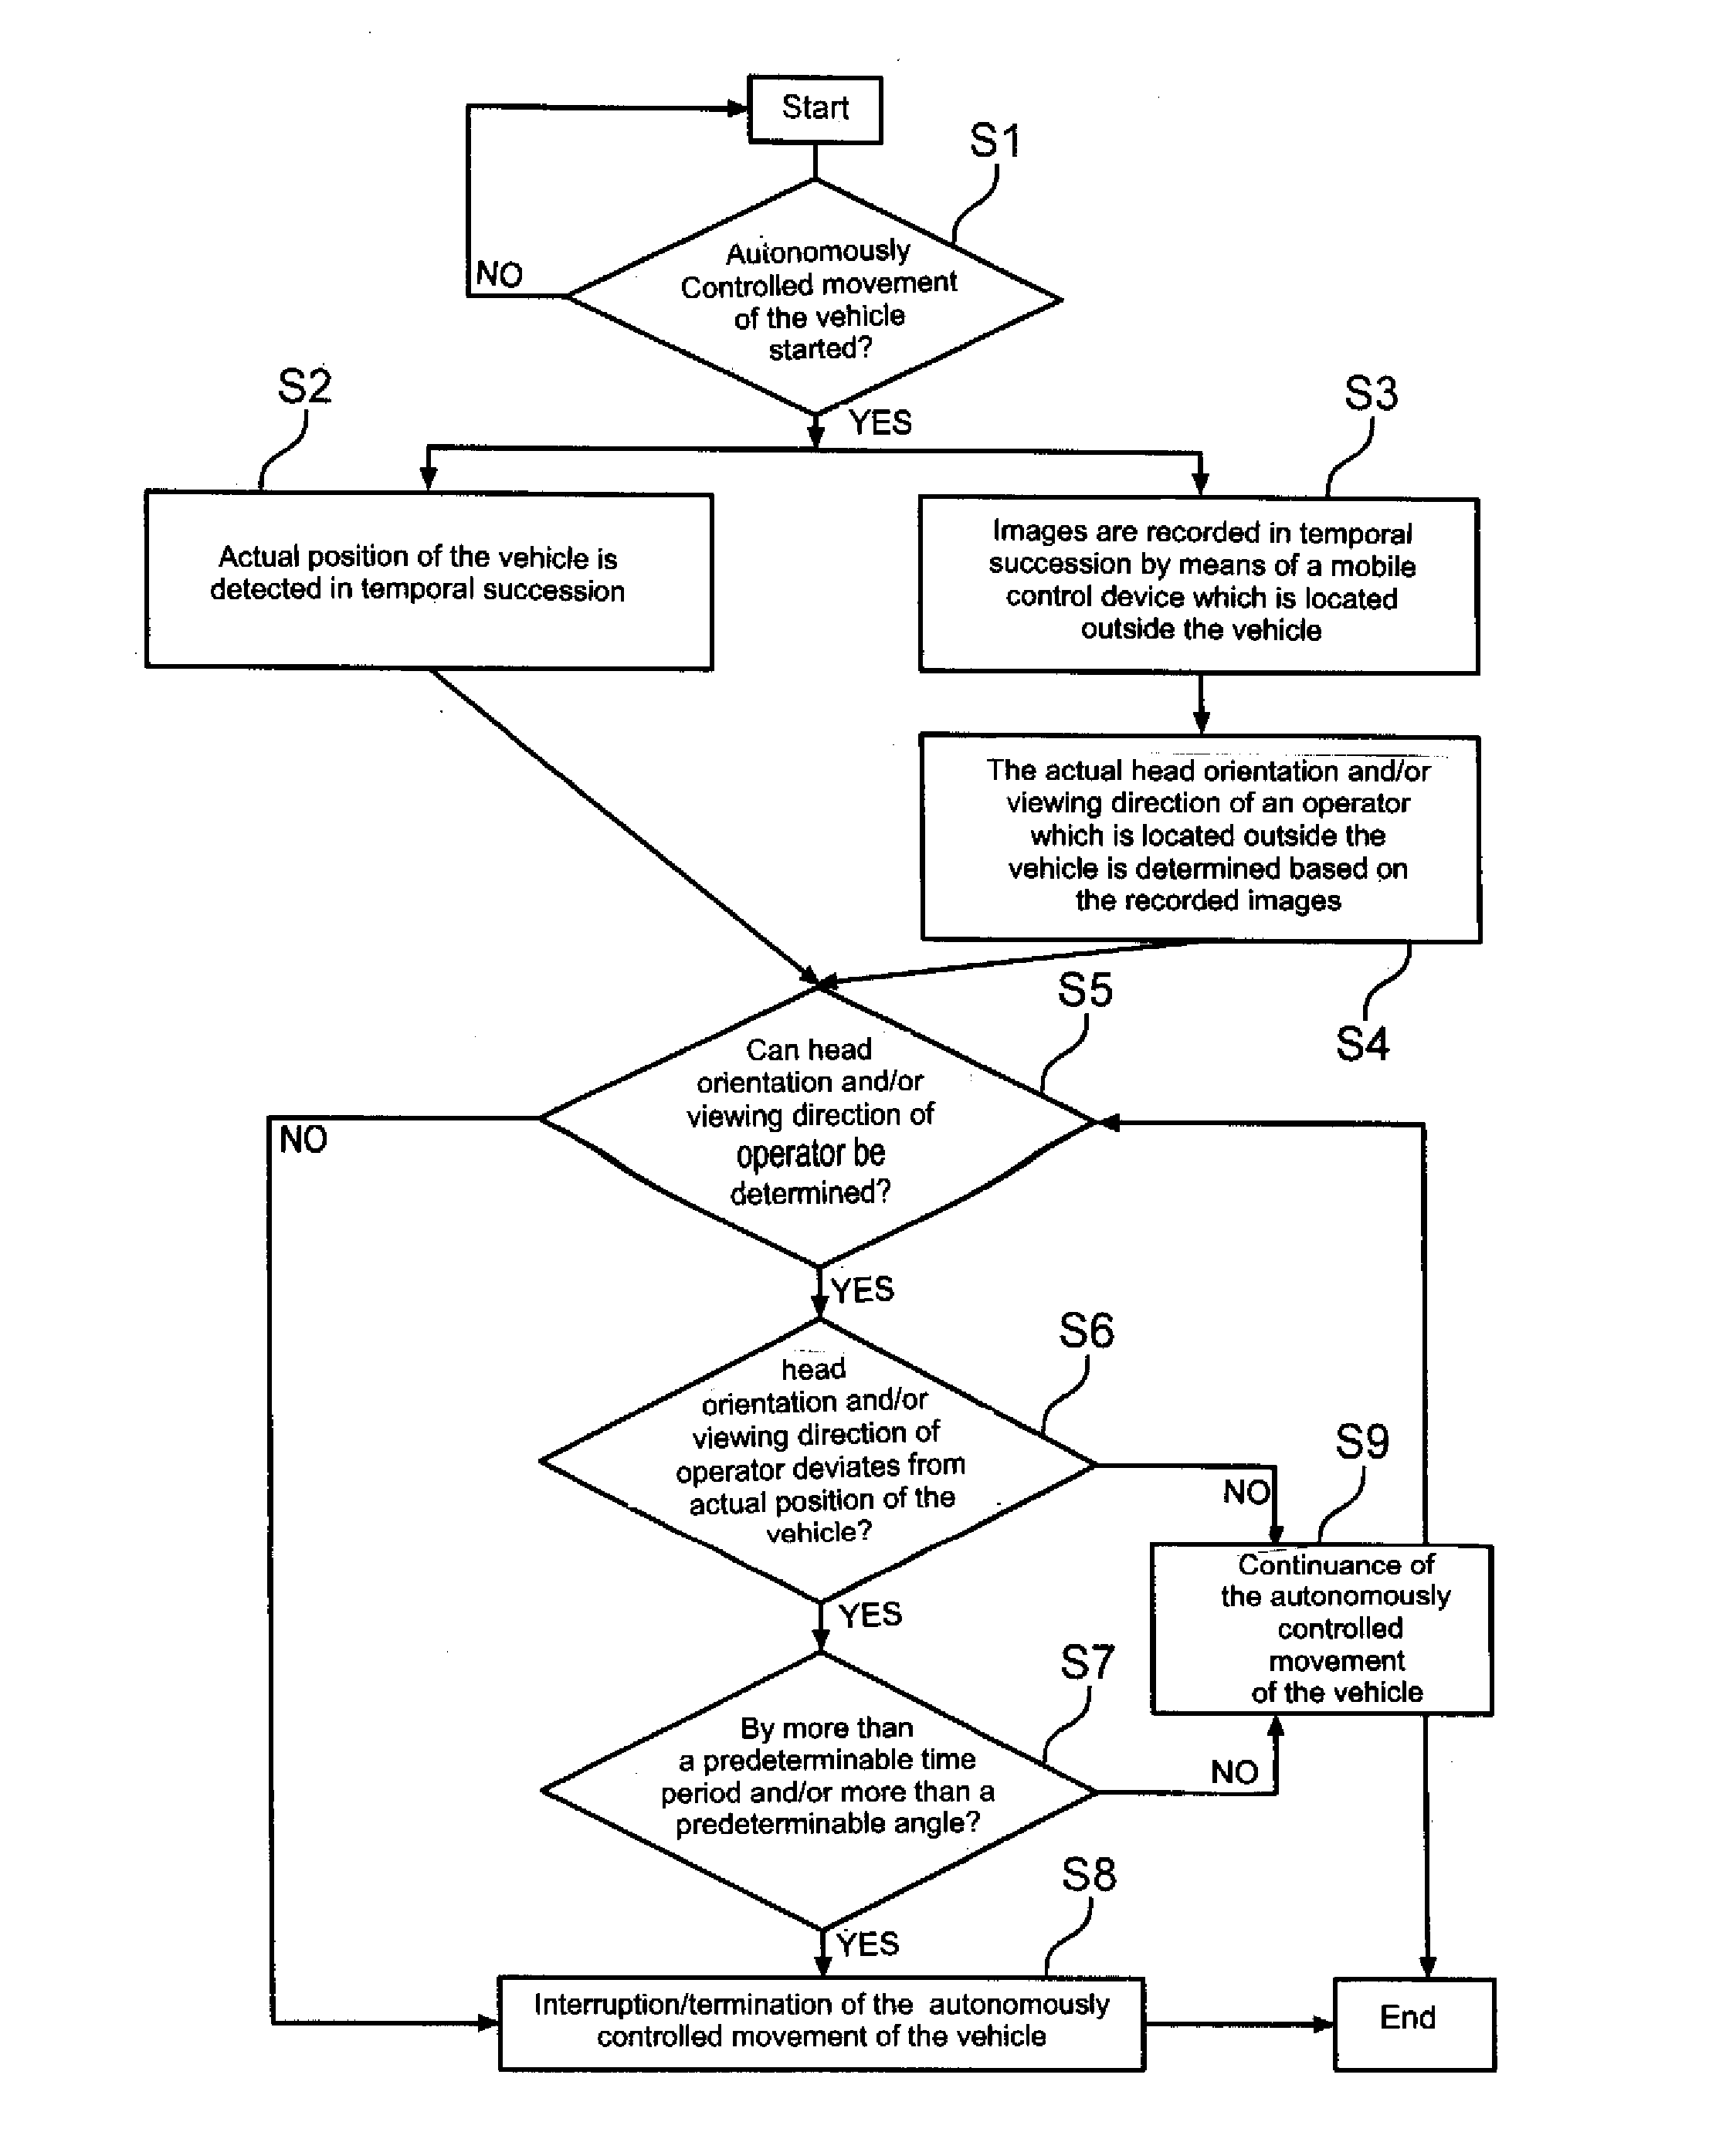 Method and system for operating a vehicle by monitoring the head orientation and/or viewing direction of an operator by means of a camera device of a mobile control device